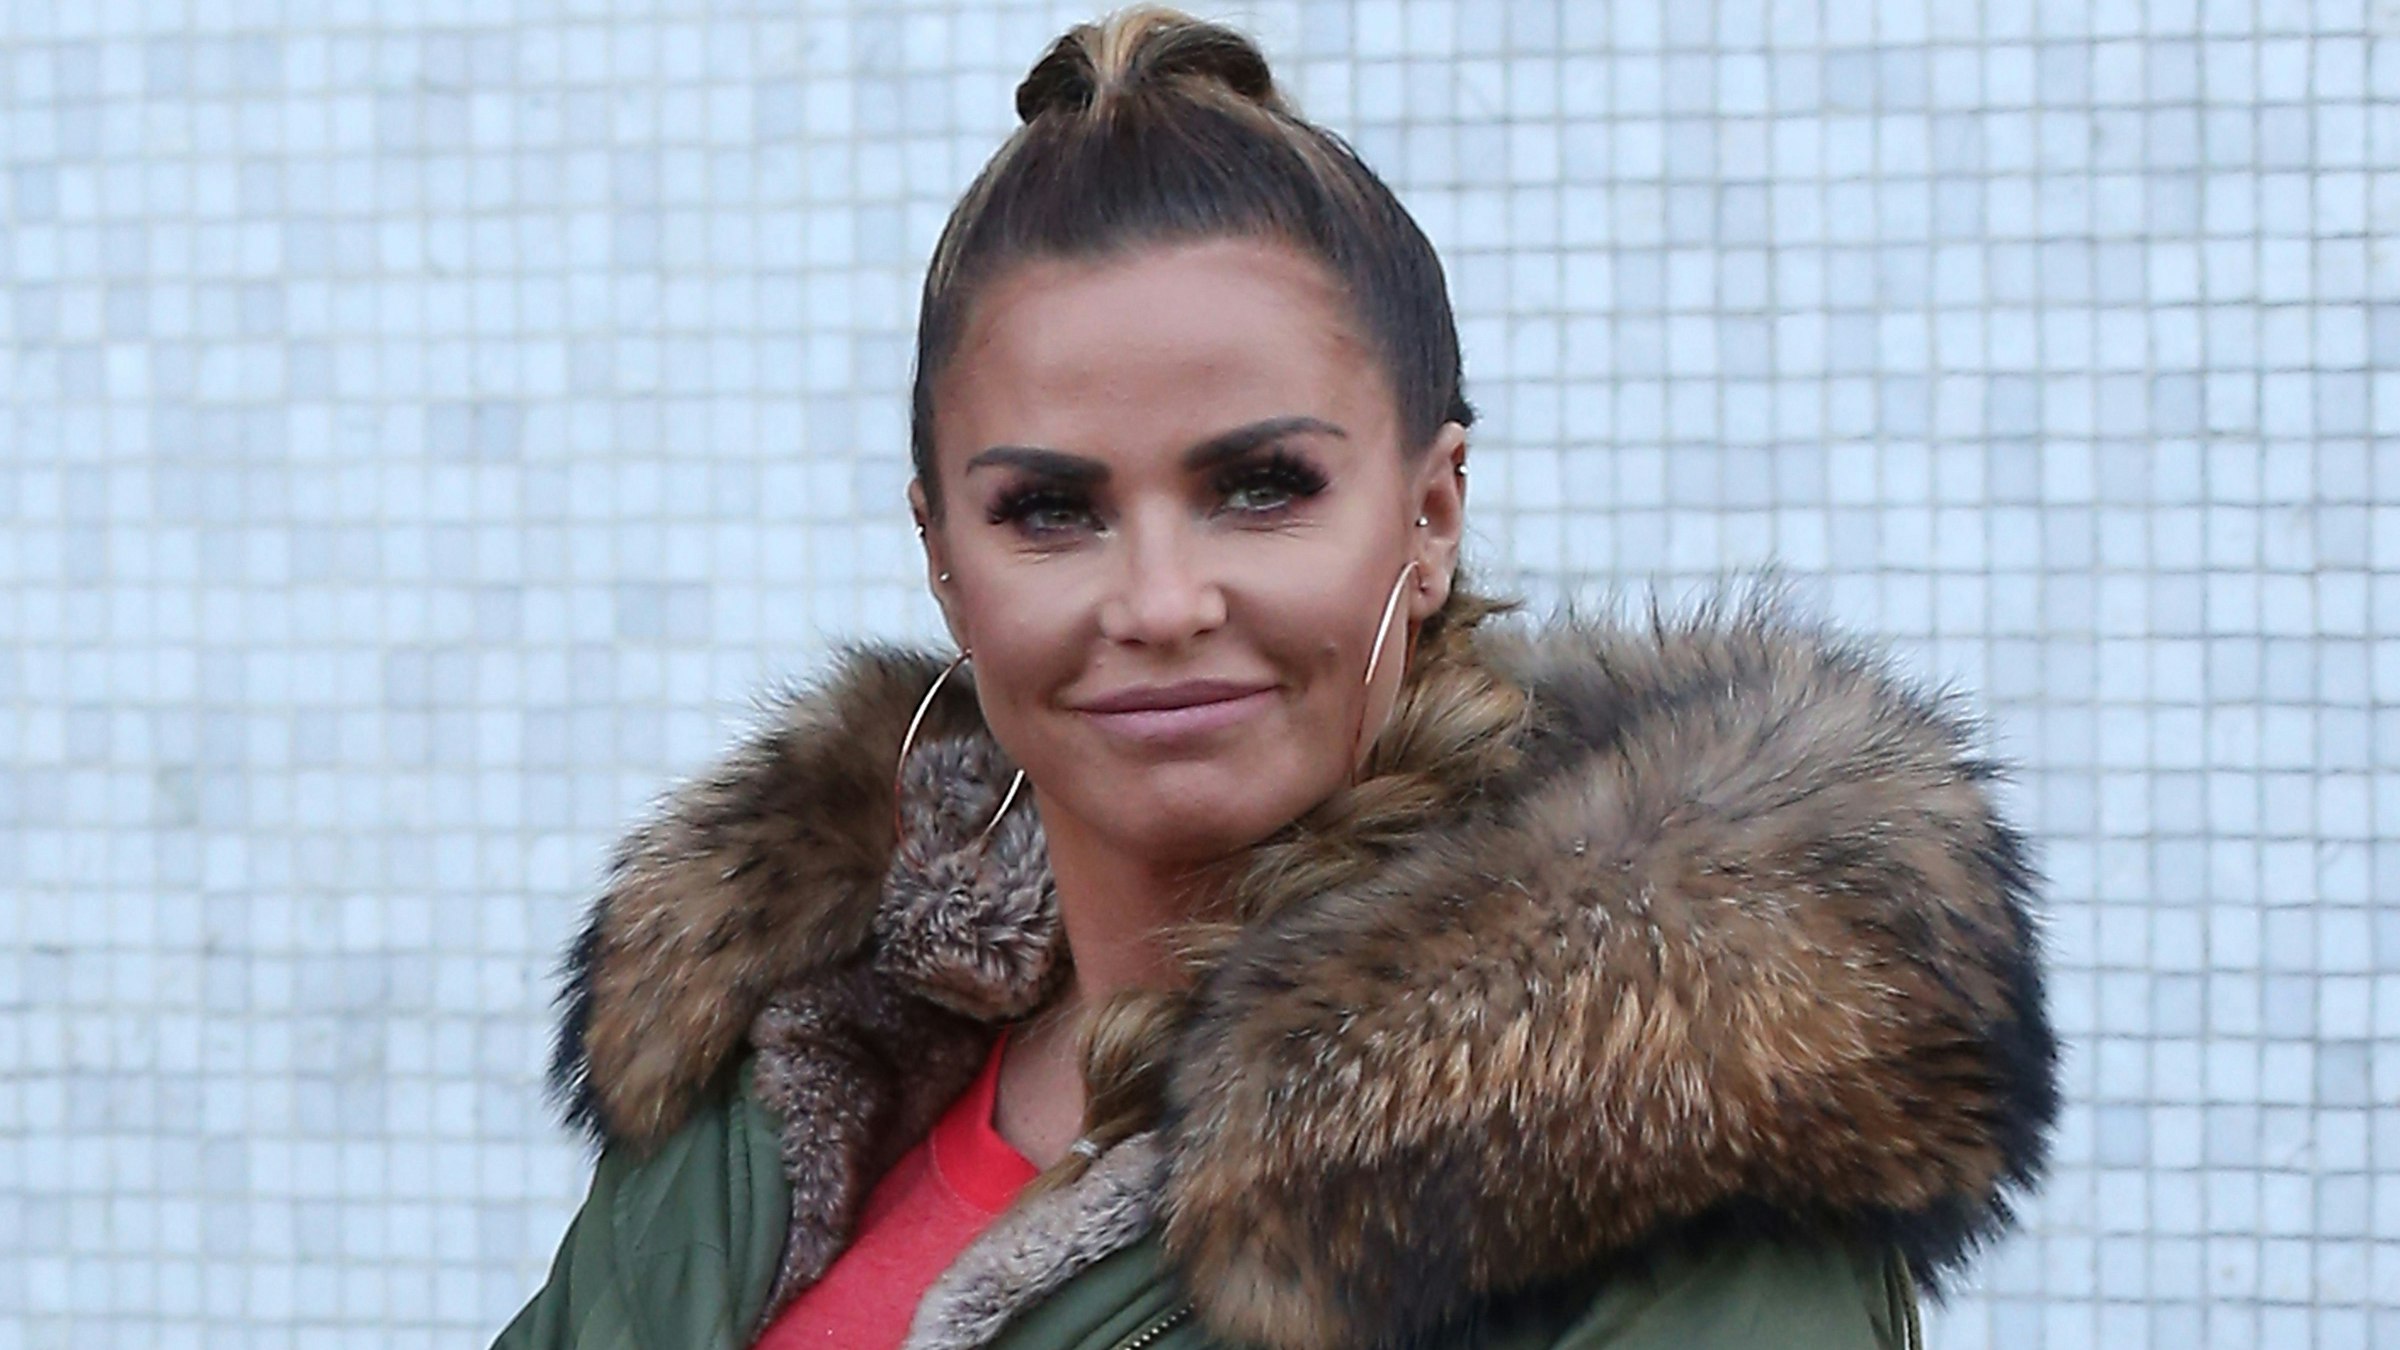 Katie Price shows off huge new boobs with long blonde hair after